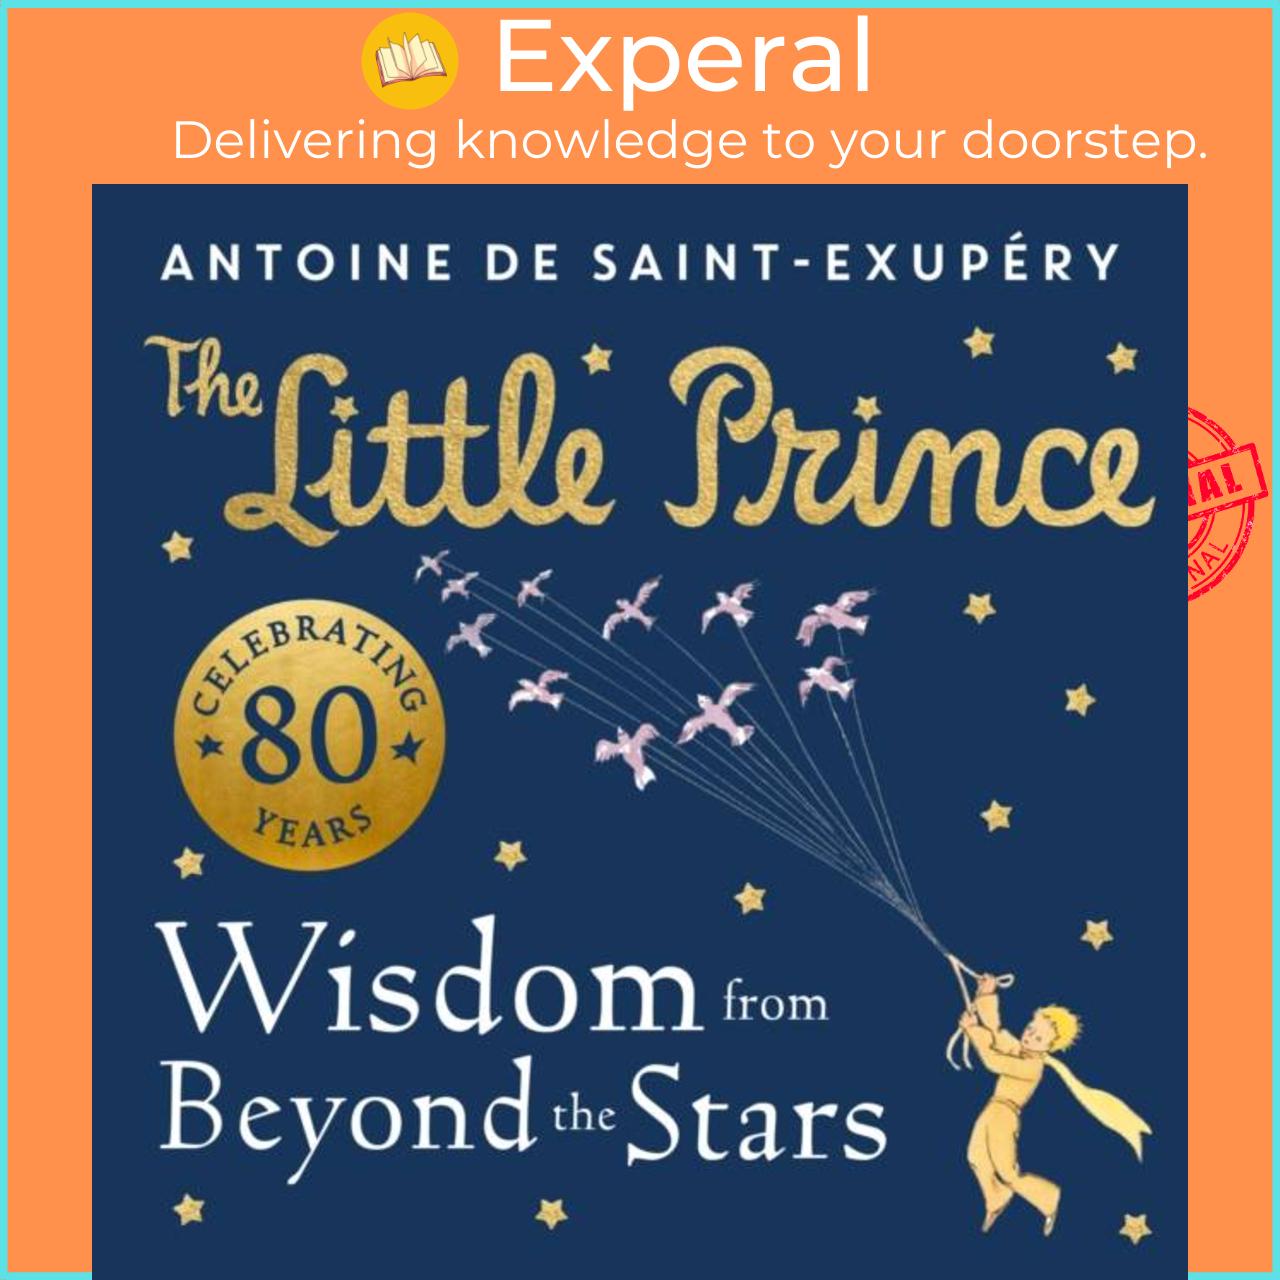 Sách - The Little Prince: Wisdom from Beyond the Stars by Antoine de Saint-Exupery (UK edition, hardcover)